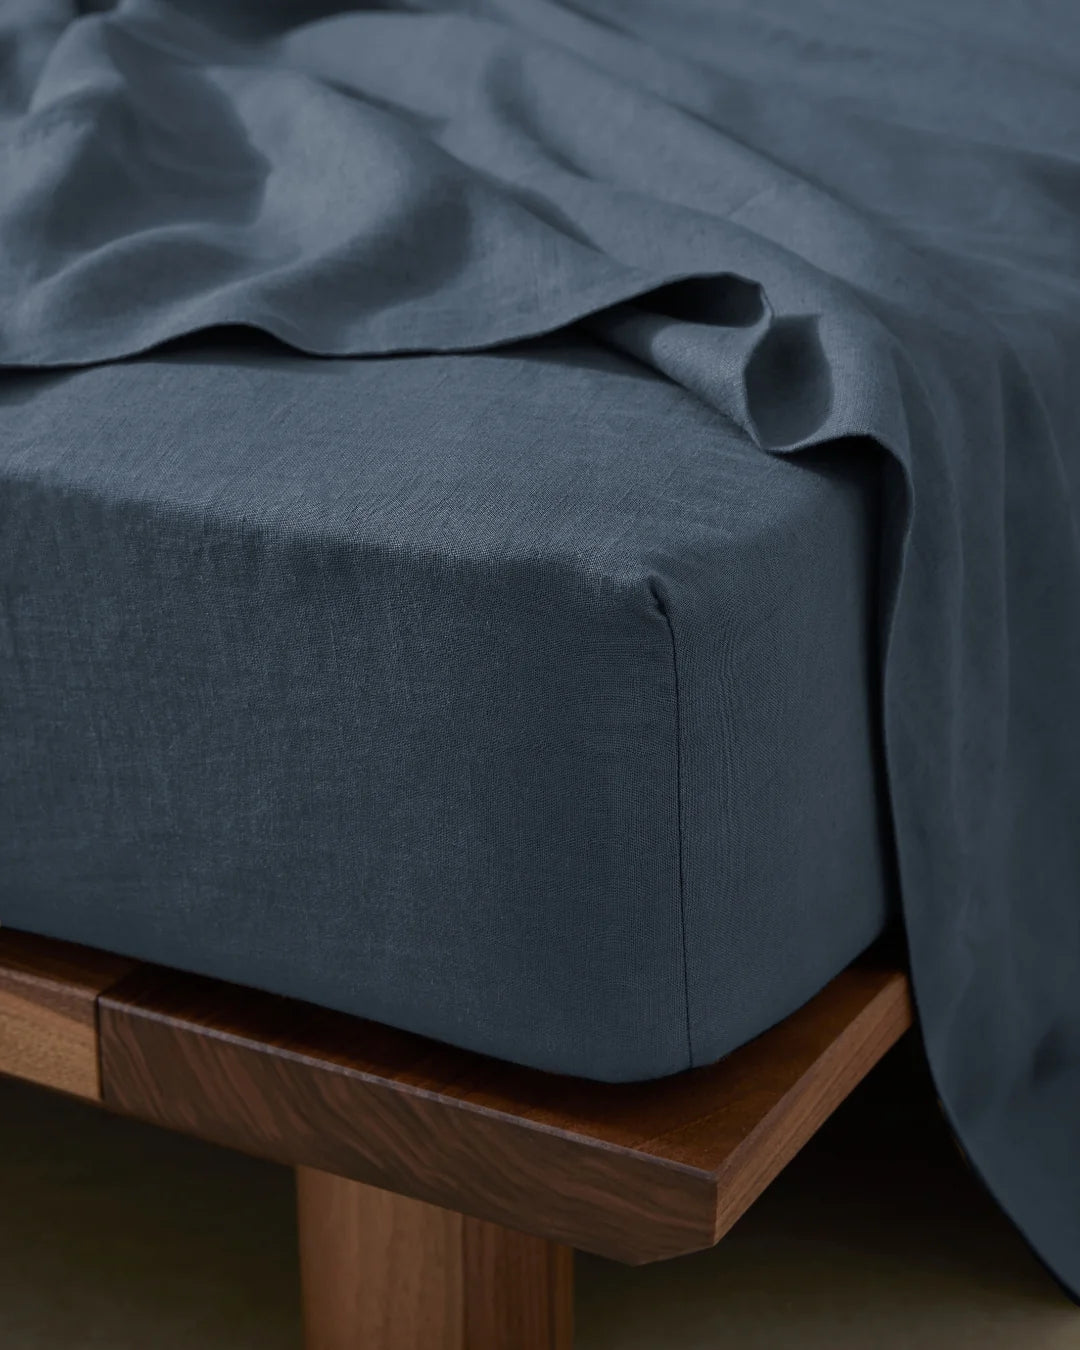 Cover your mattress with soft, luxurious linen with the Ravello Fitted Sheet. The Denim colourway is a soft denim blue that will bring a sense of calm to your bedroom and sit beautifully in any cool, neutral or coastal setting.